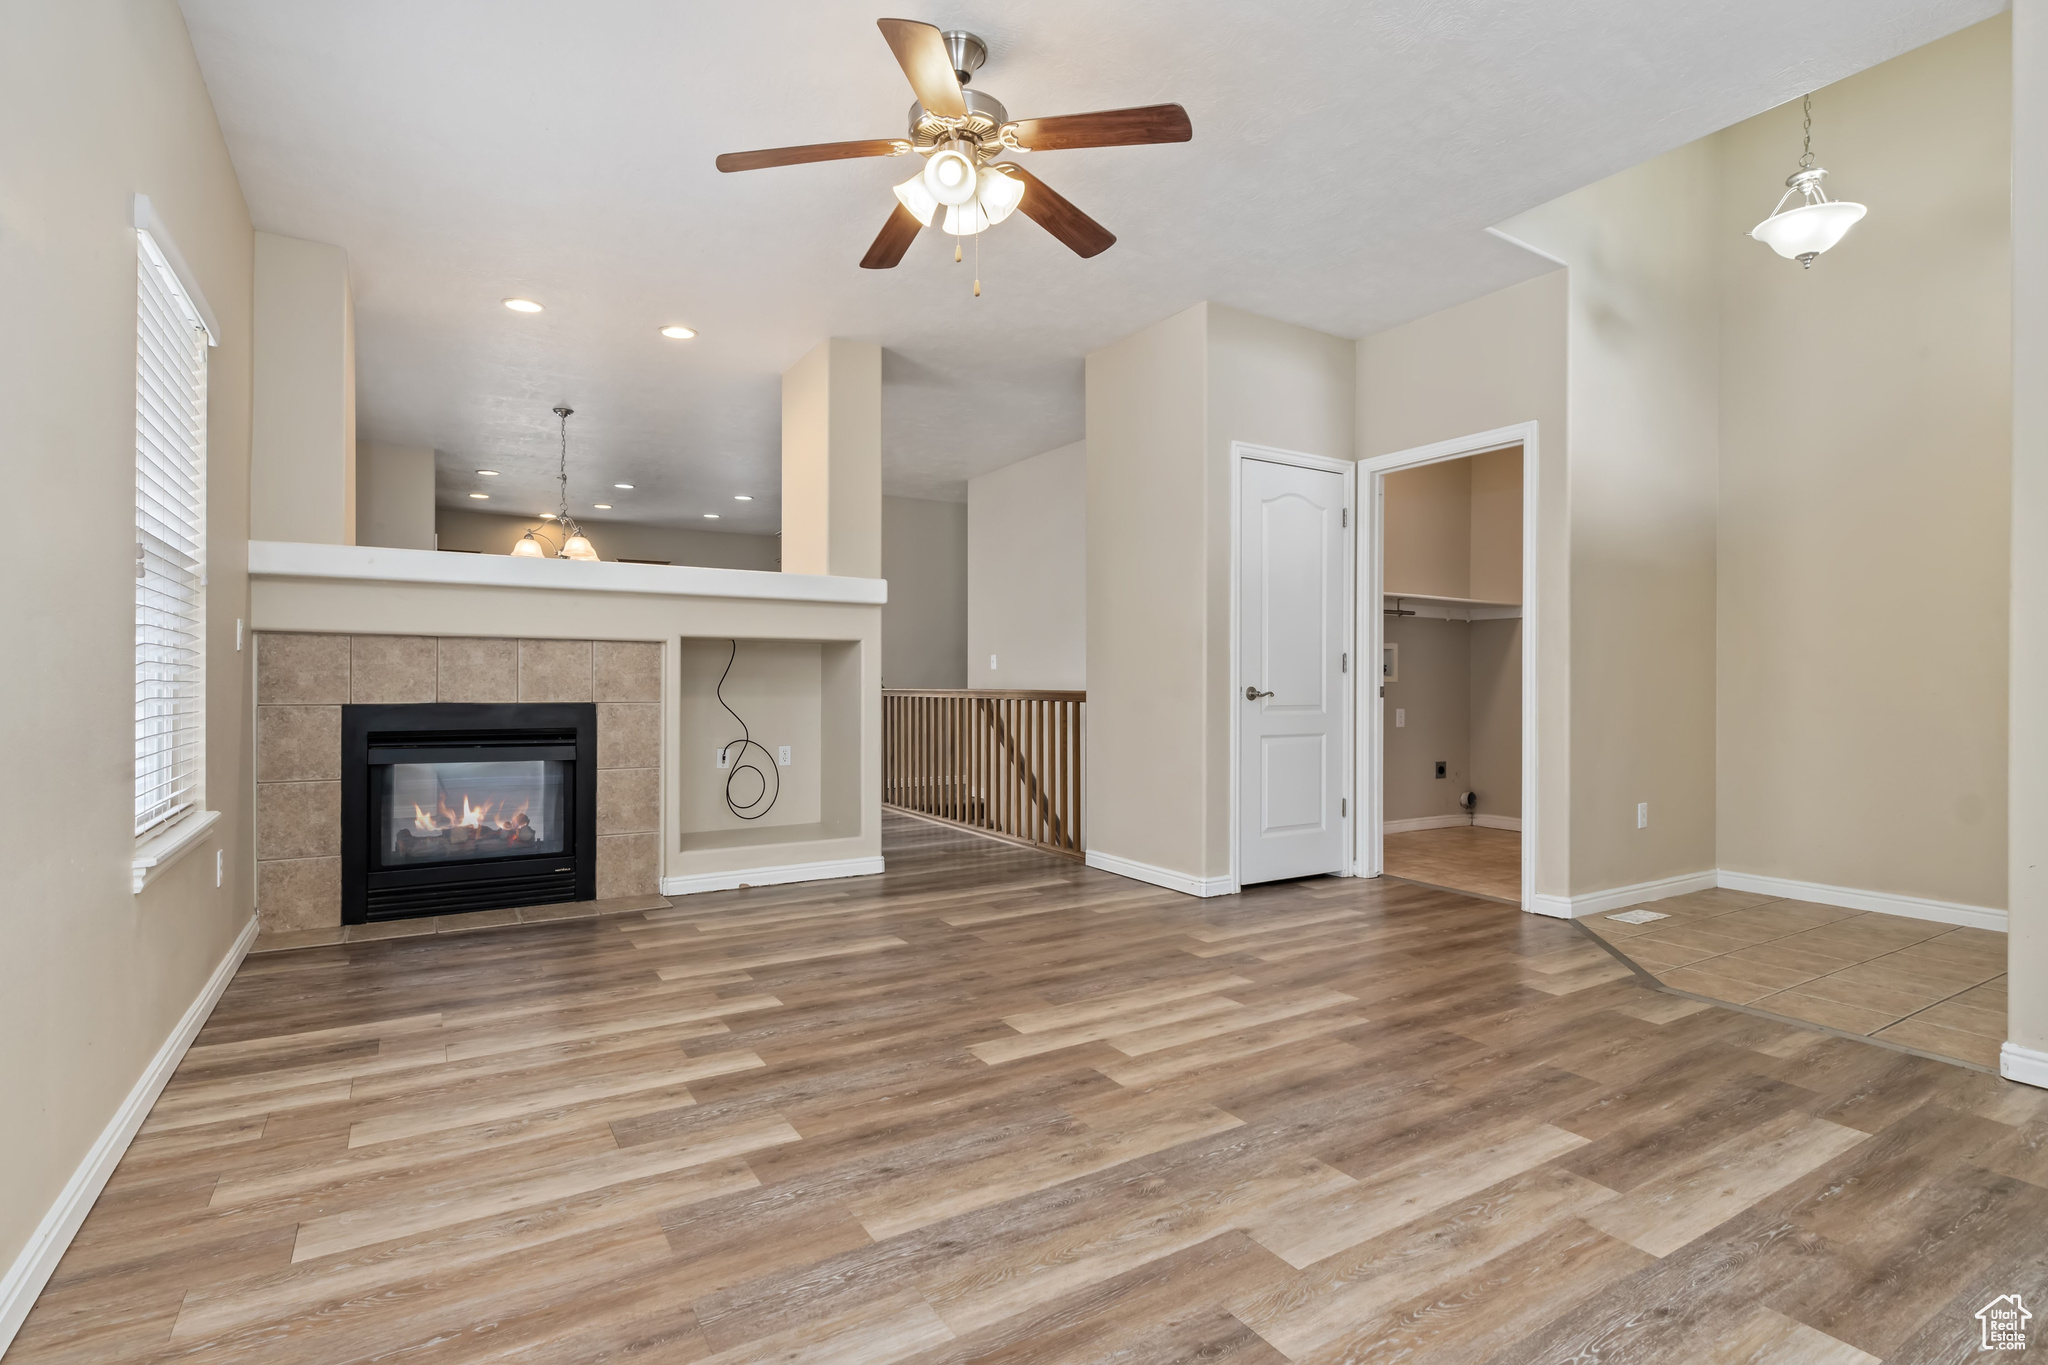 Unfurnished living room featuring light hardwood / wood-style floors, a tiled fireplace, and ceiling fan